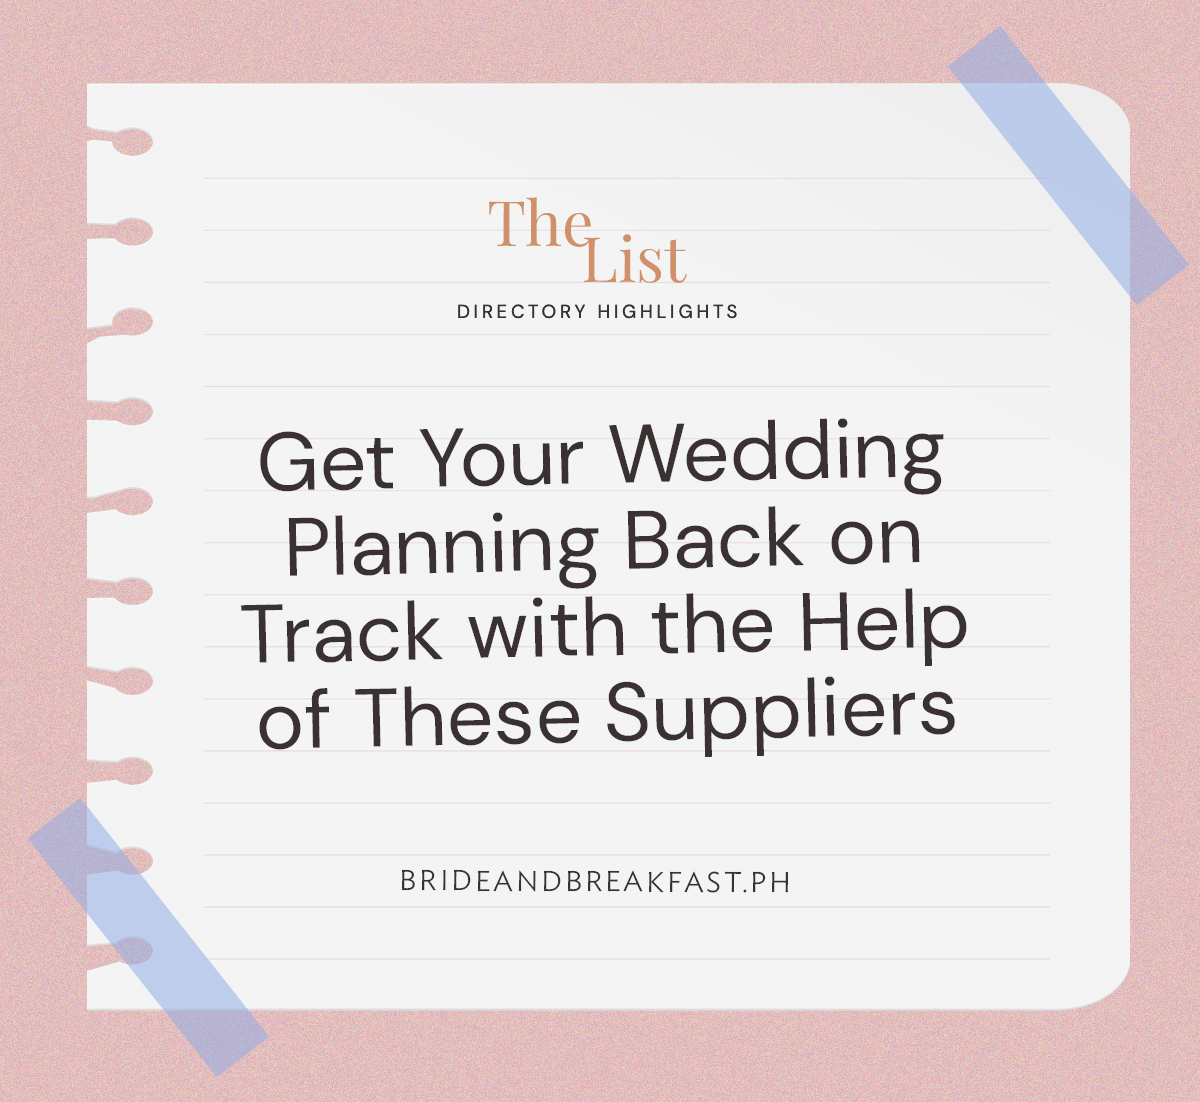 Get Your Wedding Planning Back on Track with the Help of These Suppliers